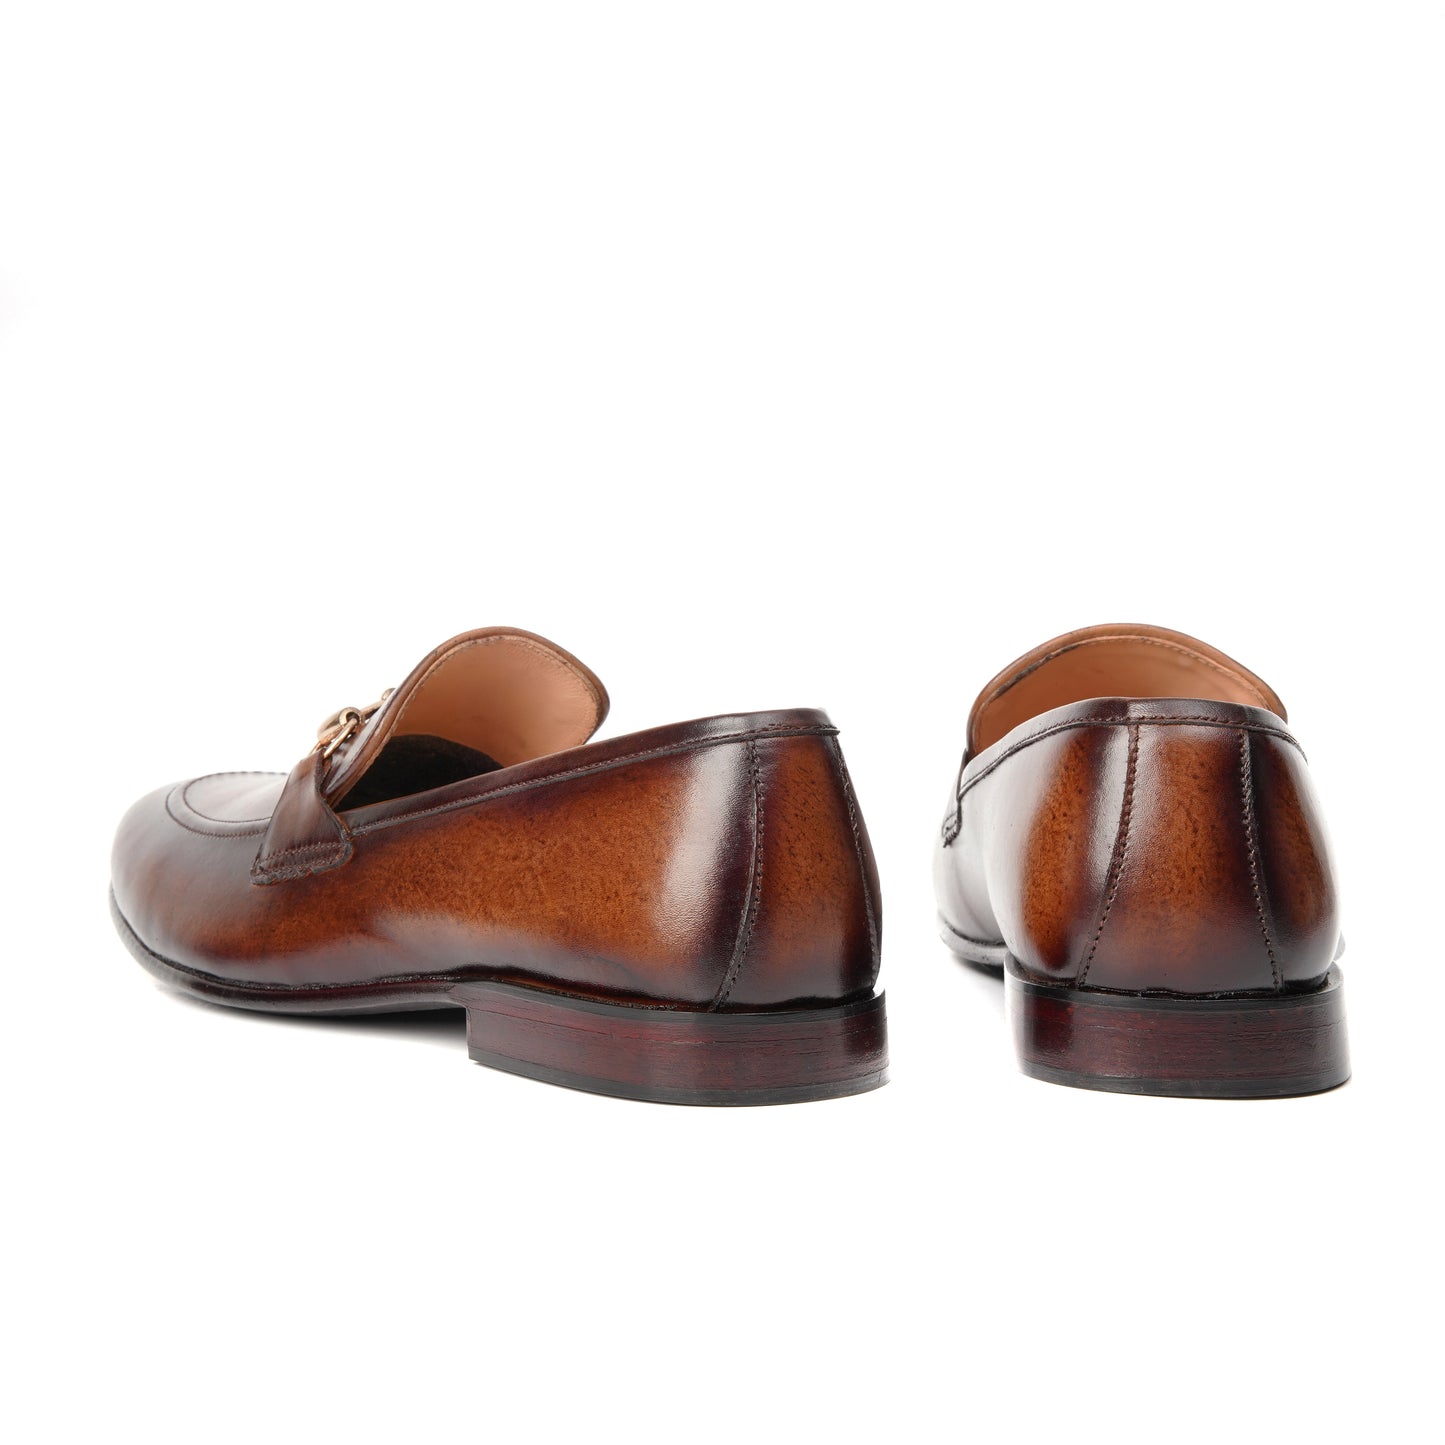 CS001-Classic Patina Brown Cow Leather Loafer